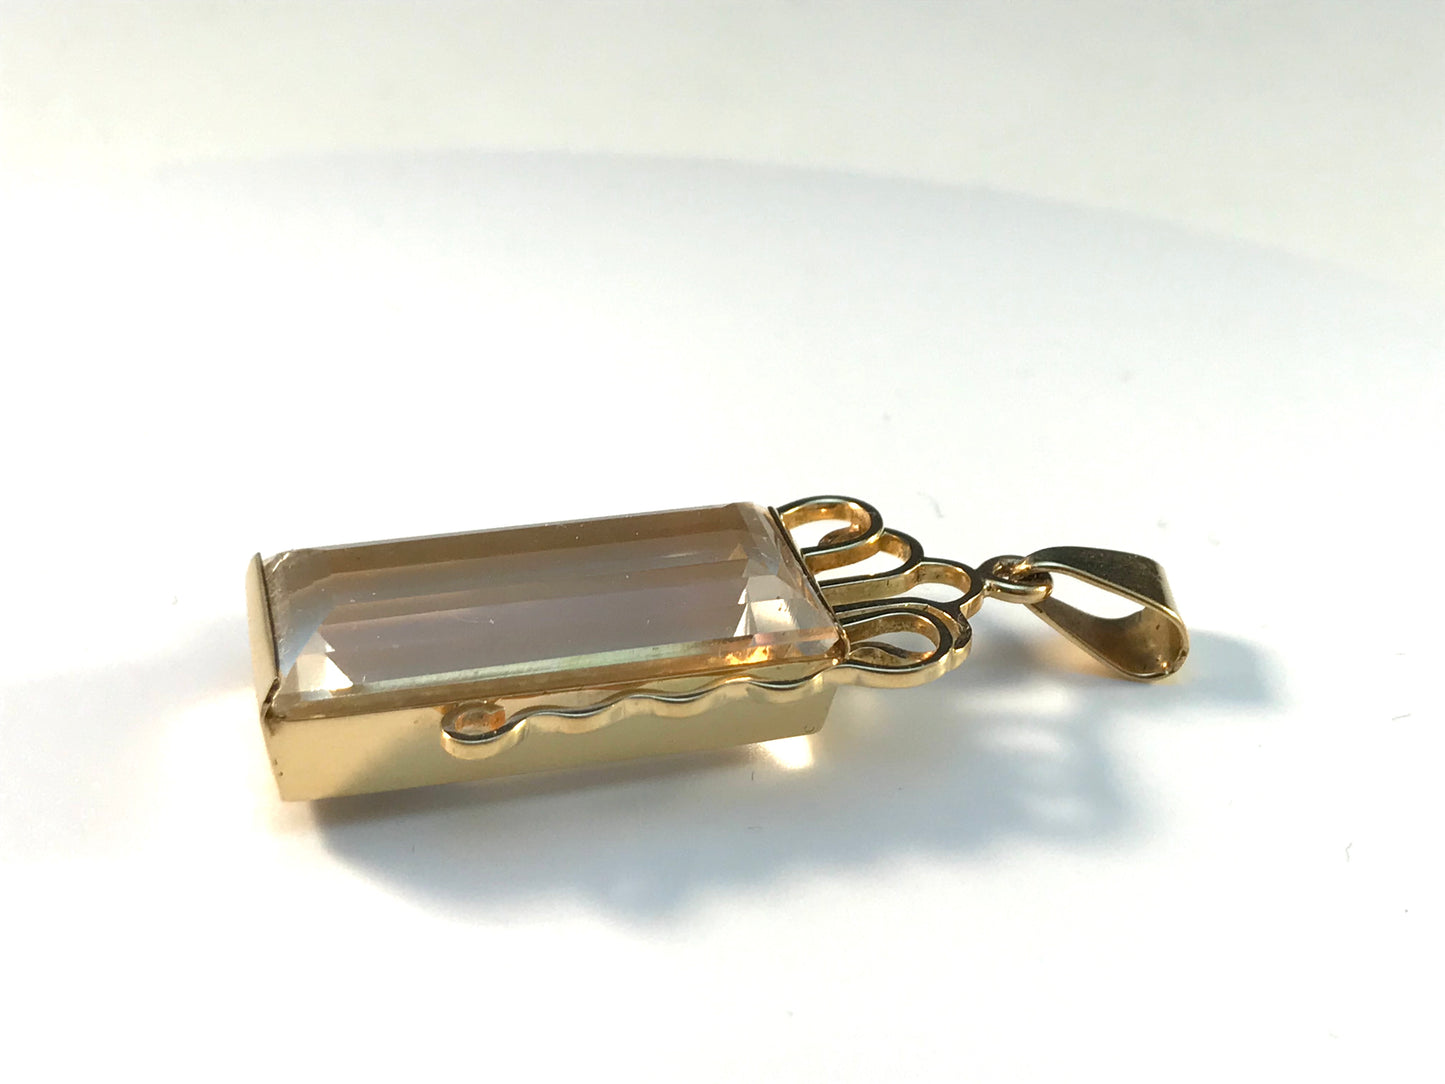 Olof Pettersson, Stockholm year 1977, 18k Gold Rock Crystal Pendant.